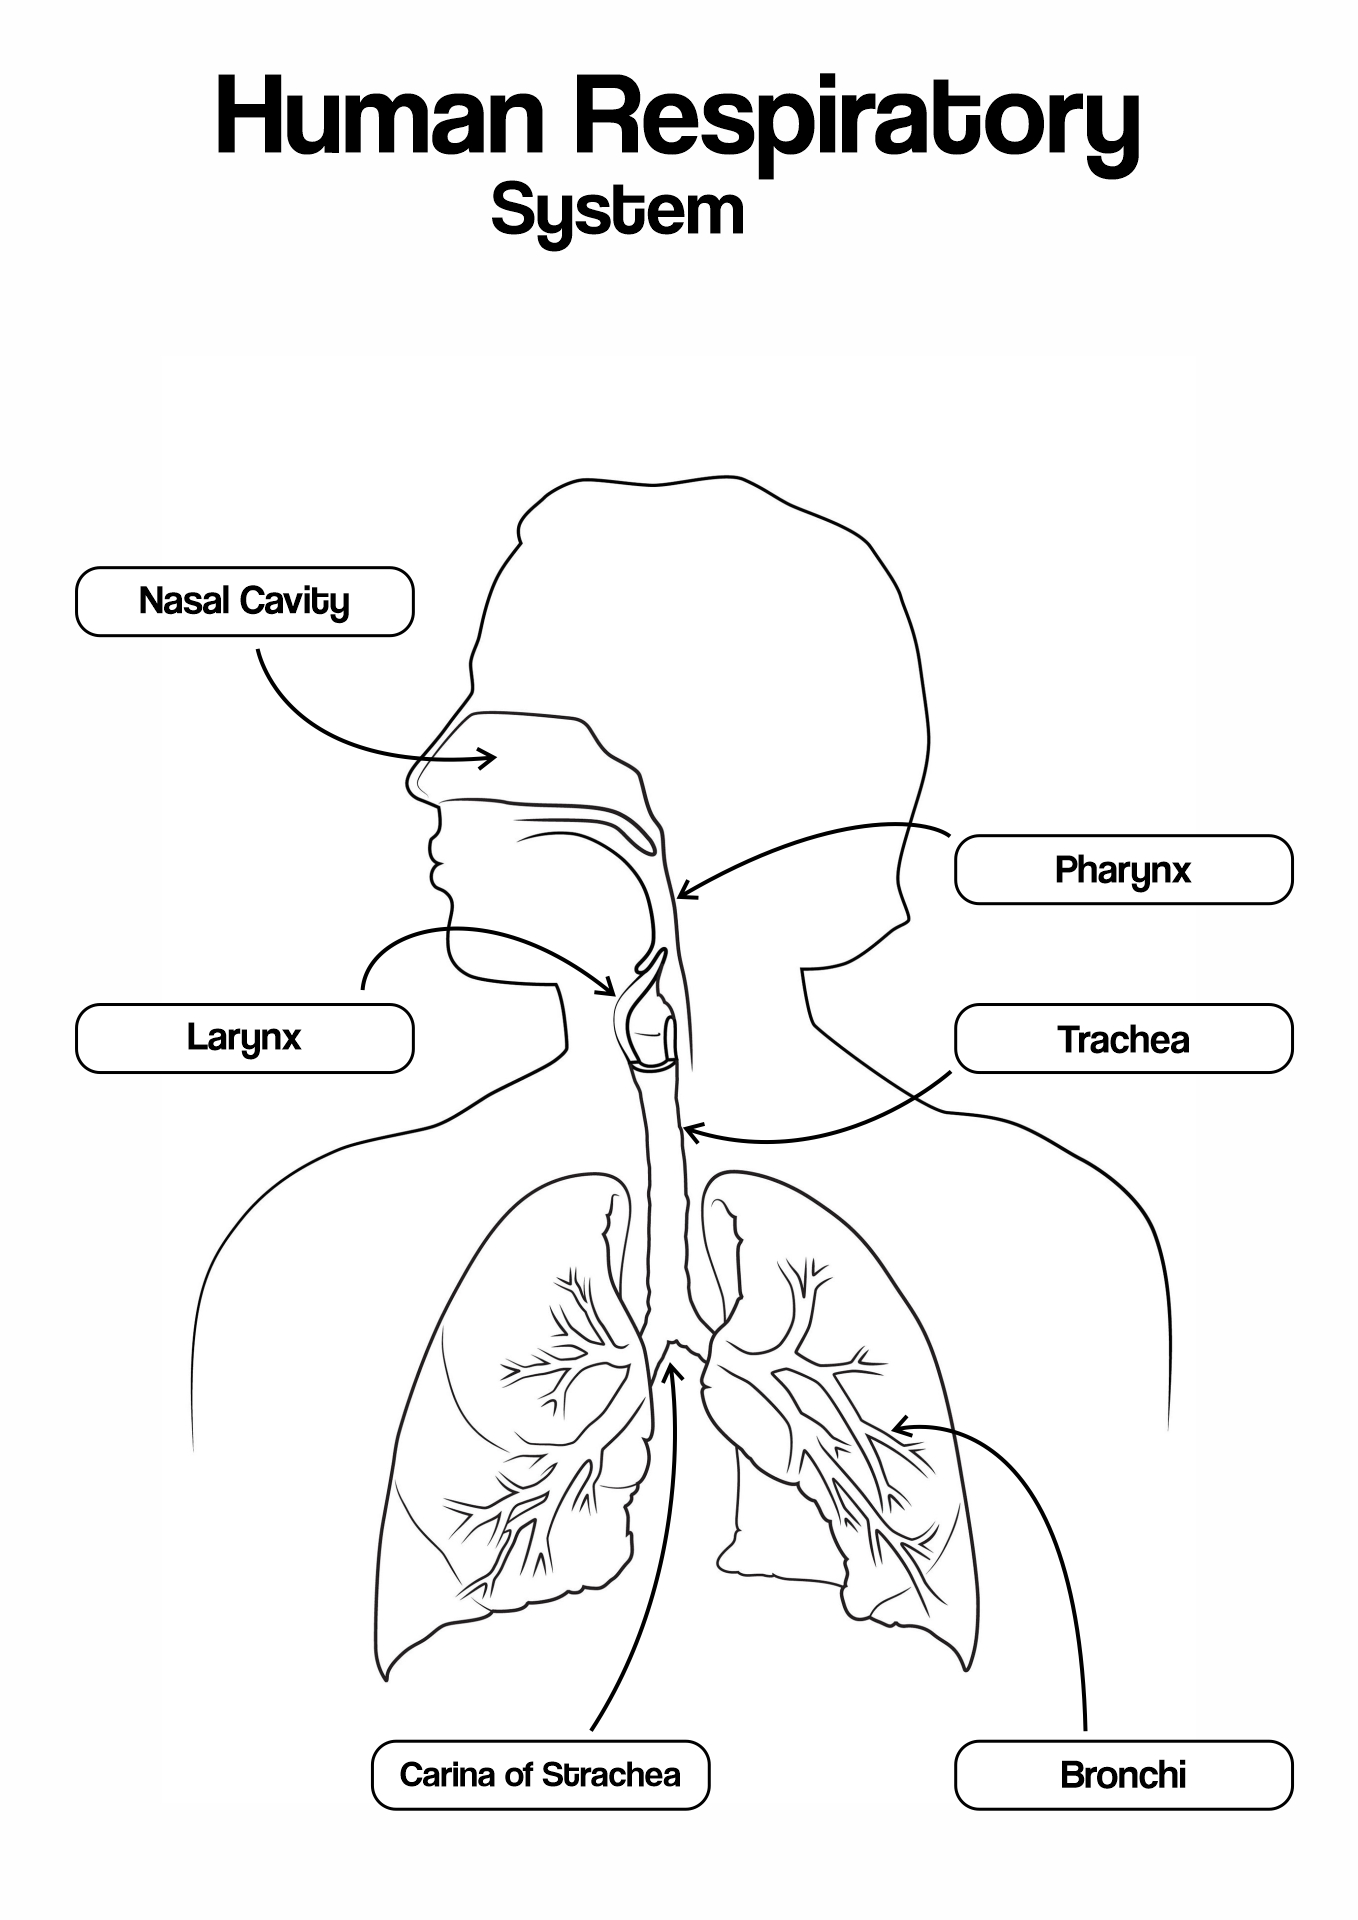 Parts of the Human Respiratory System